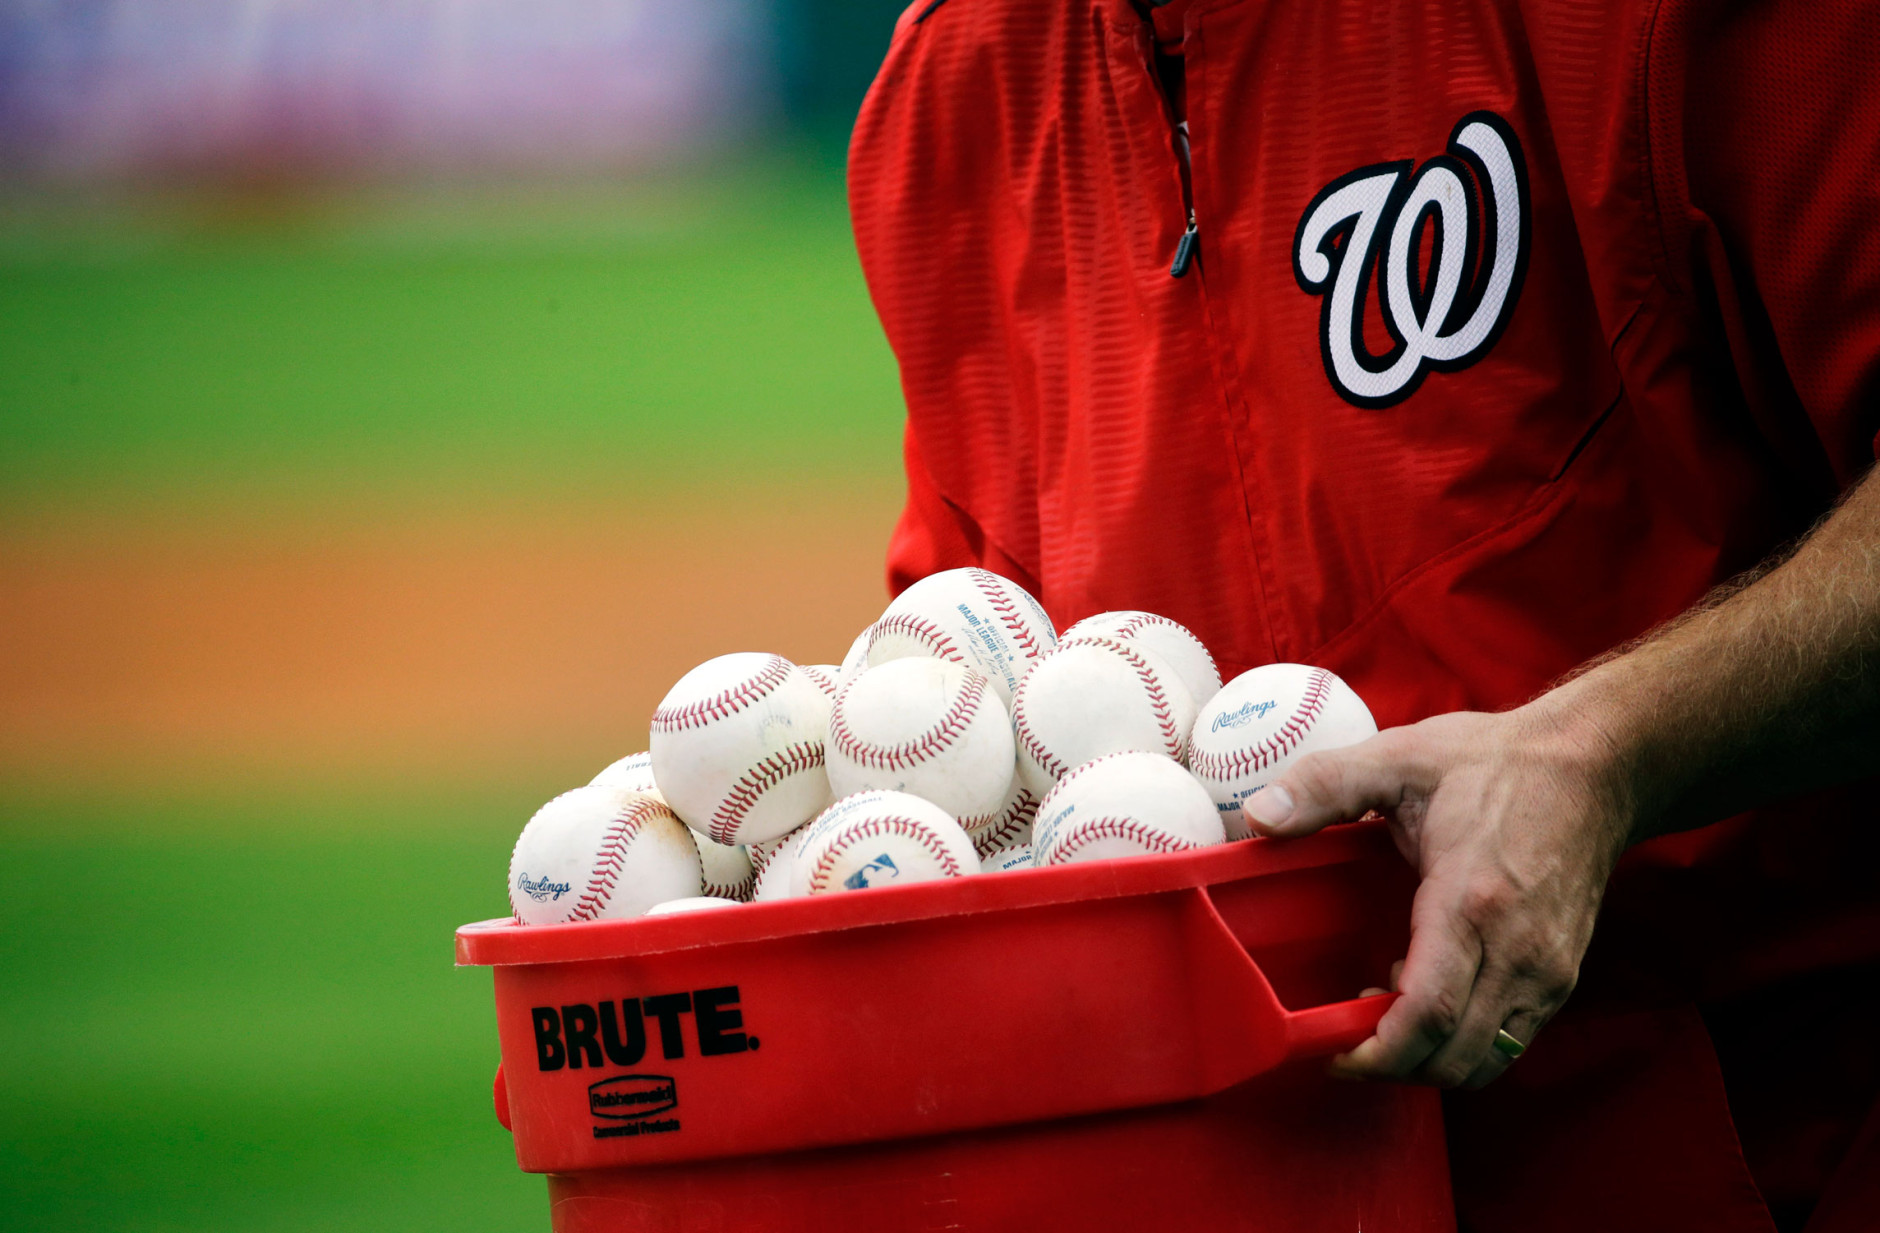 A bucket of baseballs is carried onto the field by Washington Nationals third base coach Bob Henley during a spring training baseball workout, Wednesday, Feb. 25, 2015, in Viera, Fla. (AP Photo/David Goldman)